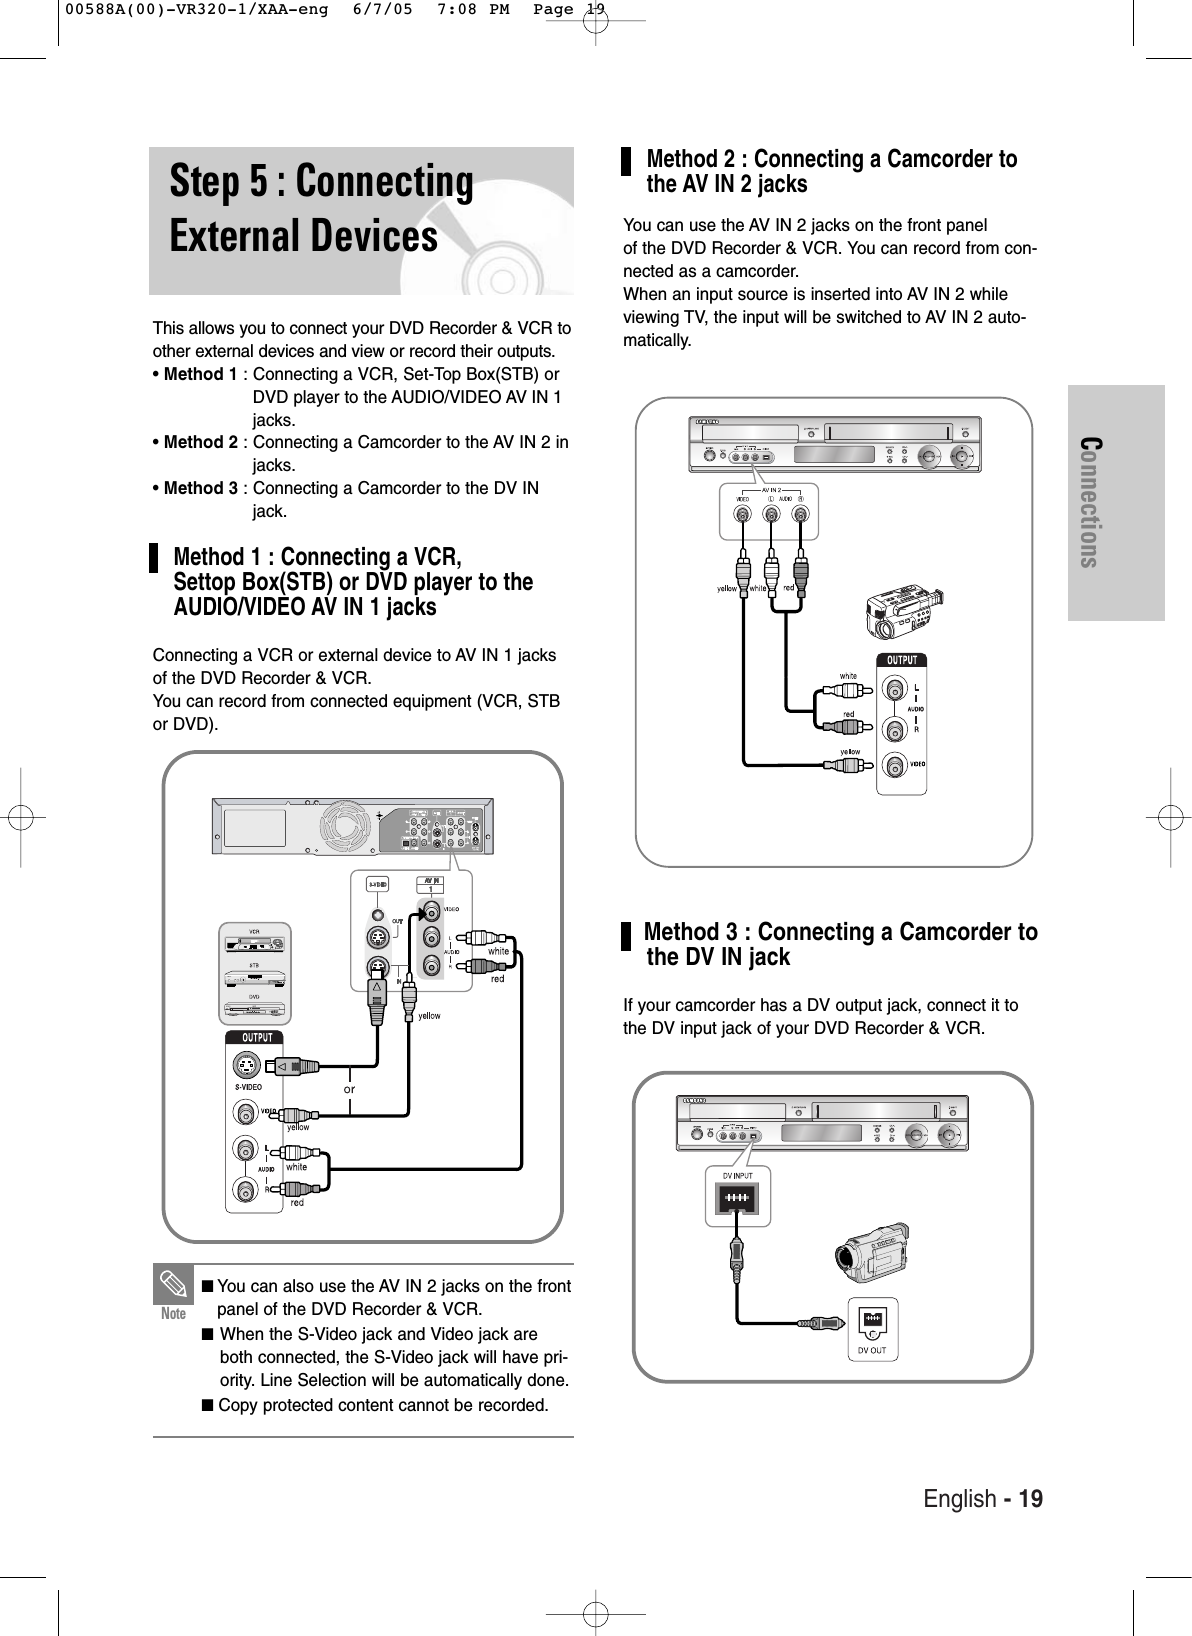 English - 19ConnectionsThis allows you to connect your DVD Recorder &amp; VCR toother external devices and view or record their outputs.• Method 1 : Connecting a VCR, Set-Top Box(STB) orDVD player to the AUDIO/VIDEO AV IN 1jacks.• Method 2 : Connecting a Camcorder to the AV IN 2 injacks.• Method 3 : Connecting a Camcorder to the DV INjack.Method 1 : Connecting a VCR, Settop Box(STB) or DVD player to the AUDIO/VIDEO AV IN 1 jacksConnecting a VCR or external device to AV IN 1 jacksof the DVD Recorder &amp; VCR.You can record from connected equipment (VCR, STBor DVD).Step 5 : ConnectingExternal Devices■You can also use the AV IN 2 jacks on the frontpanel of the DVD Recorder &amp; VCR.■ When the S-Video jack and Video jack areboth connected, the S-Video jack will have pri-ority. Line Selection will be automatically done.■ Copy protected content cannot be recorded.NoteMethod 2 : Connecting a Camcorder tothe AV IN 2 jacksYou can use the AV IN 2 jacks on the front panelof the DVD Recorder &amp; VCR. You can record from con-nected as a camcorder.When an input source is inserted into AV IN 2 whileviewing TV, the input will be switched to AV IN 2 auto-matically.Method 3 : Connecting a Camcorder to the DV IN jackIf your camcorder has a DV output jack, connect it tothe DV input jack of your DVD Recorder &amp; VCR.00588A(00)-VR320-1/XAA-eng  6/7/05  7:08 PM  Page 19